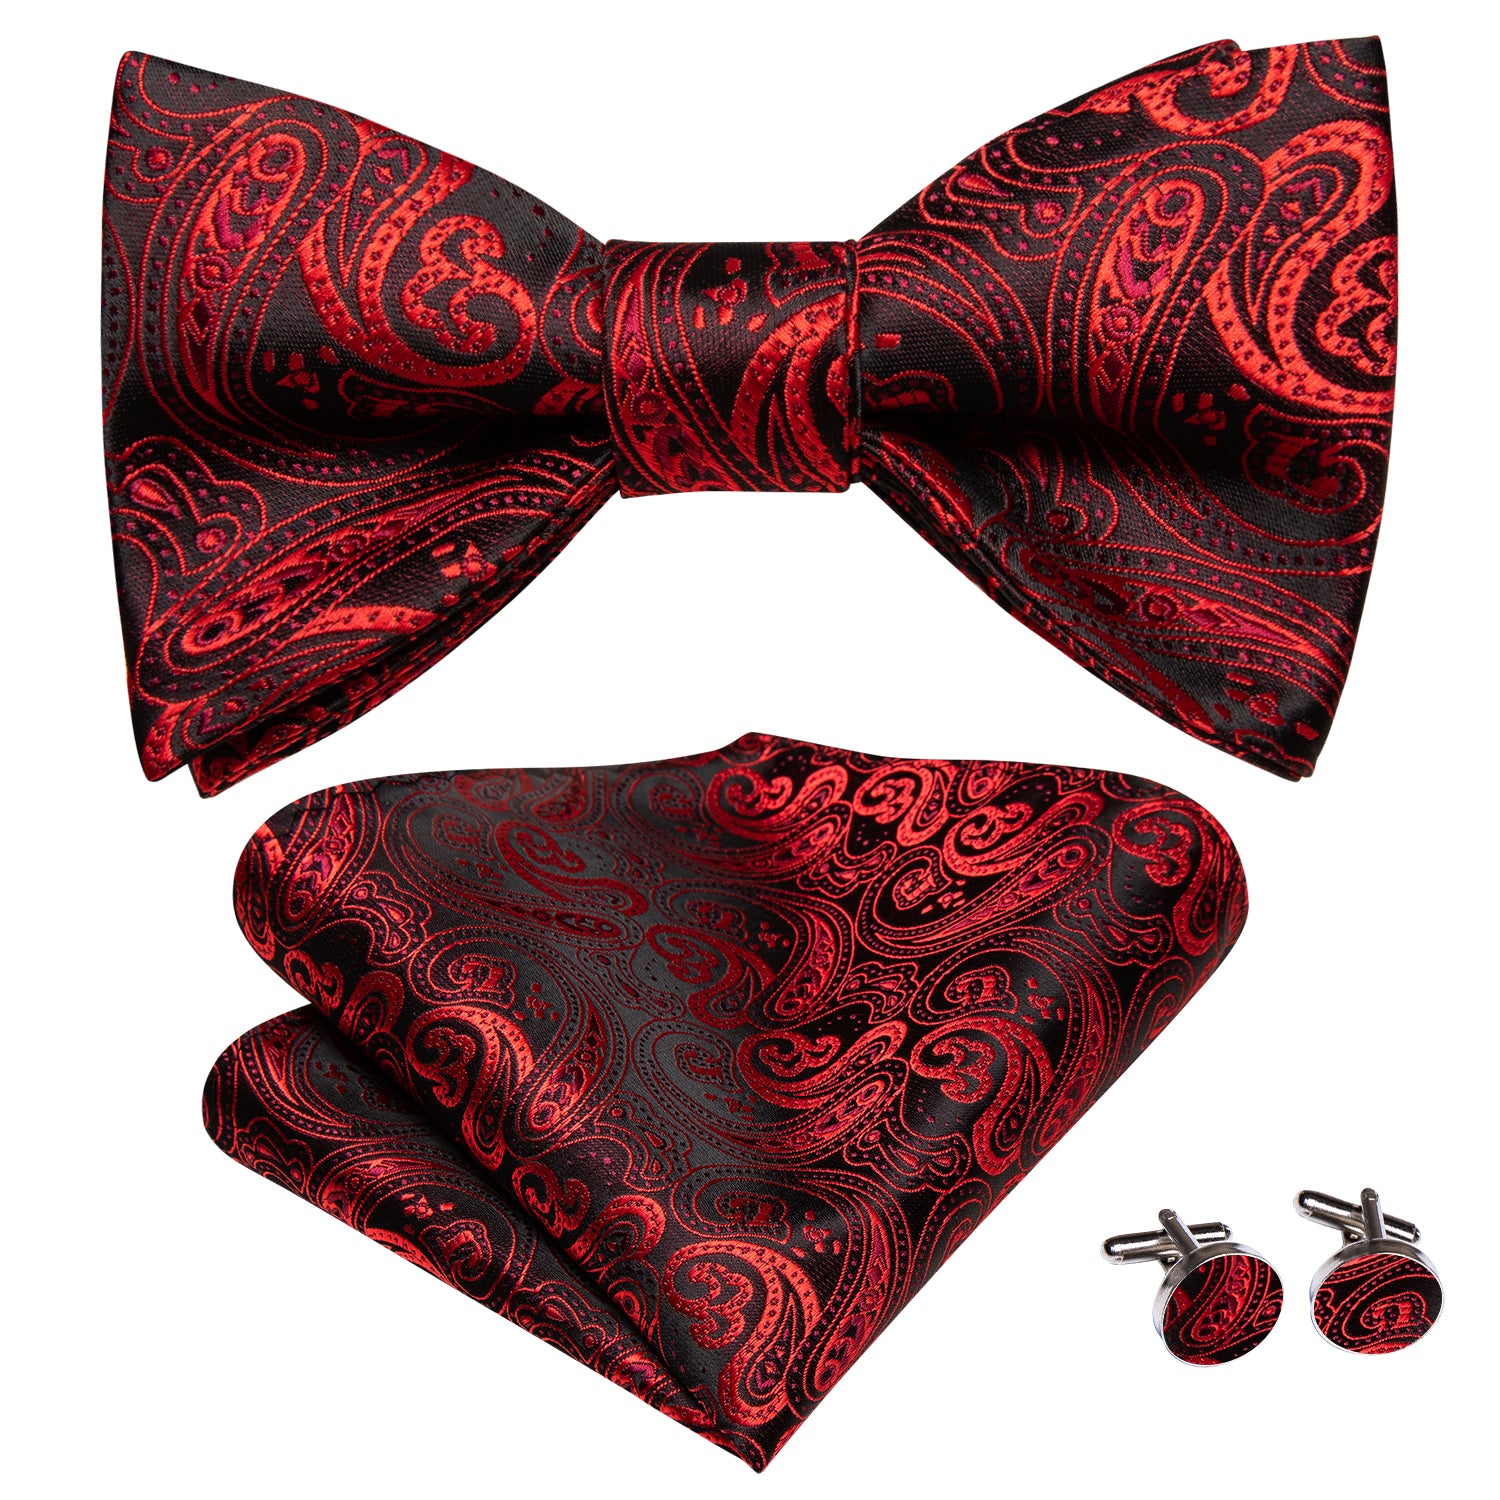 New Black Red Paisley  Self-tied Bow Tie Pocket Square Cufflinks Set